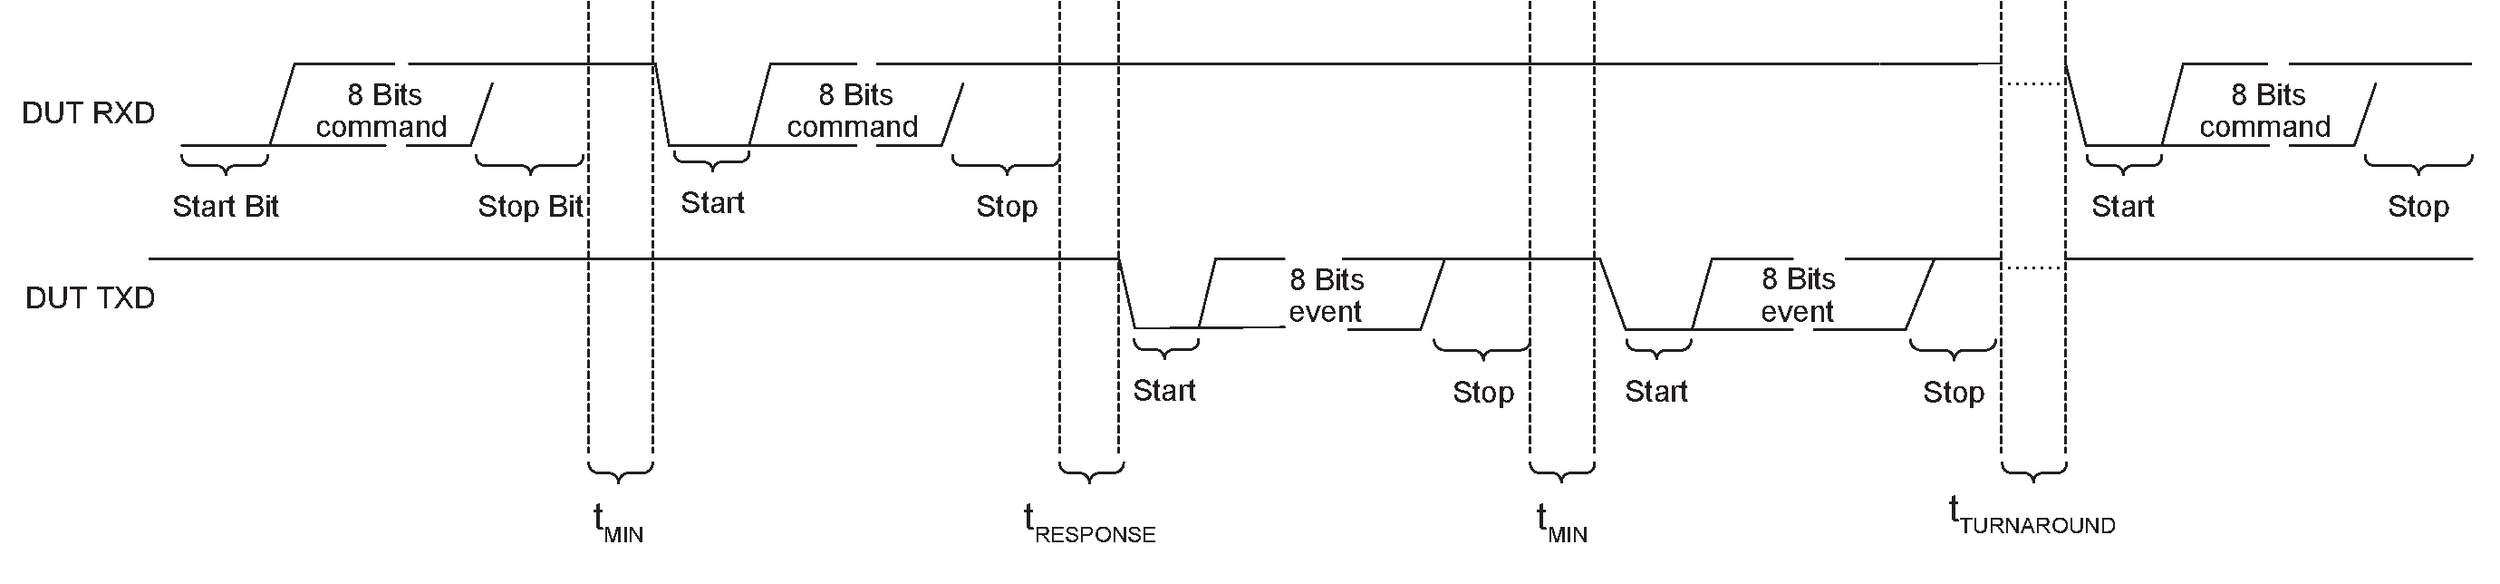 Command and event timing on 2-wire UART interface